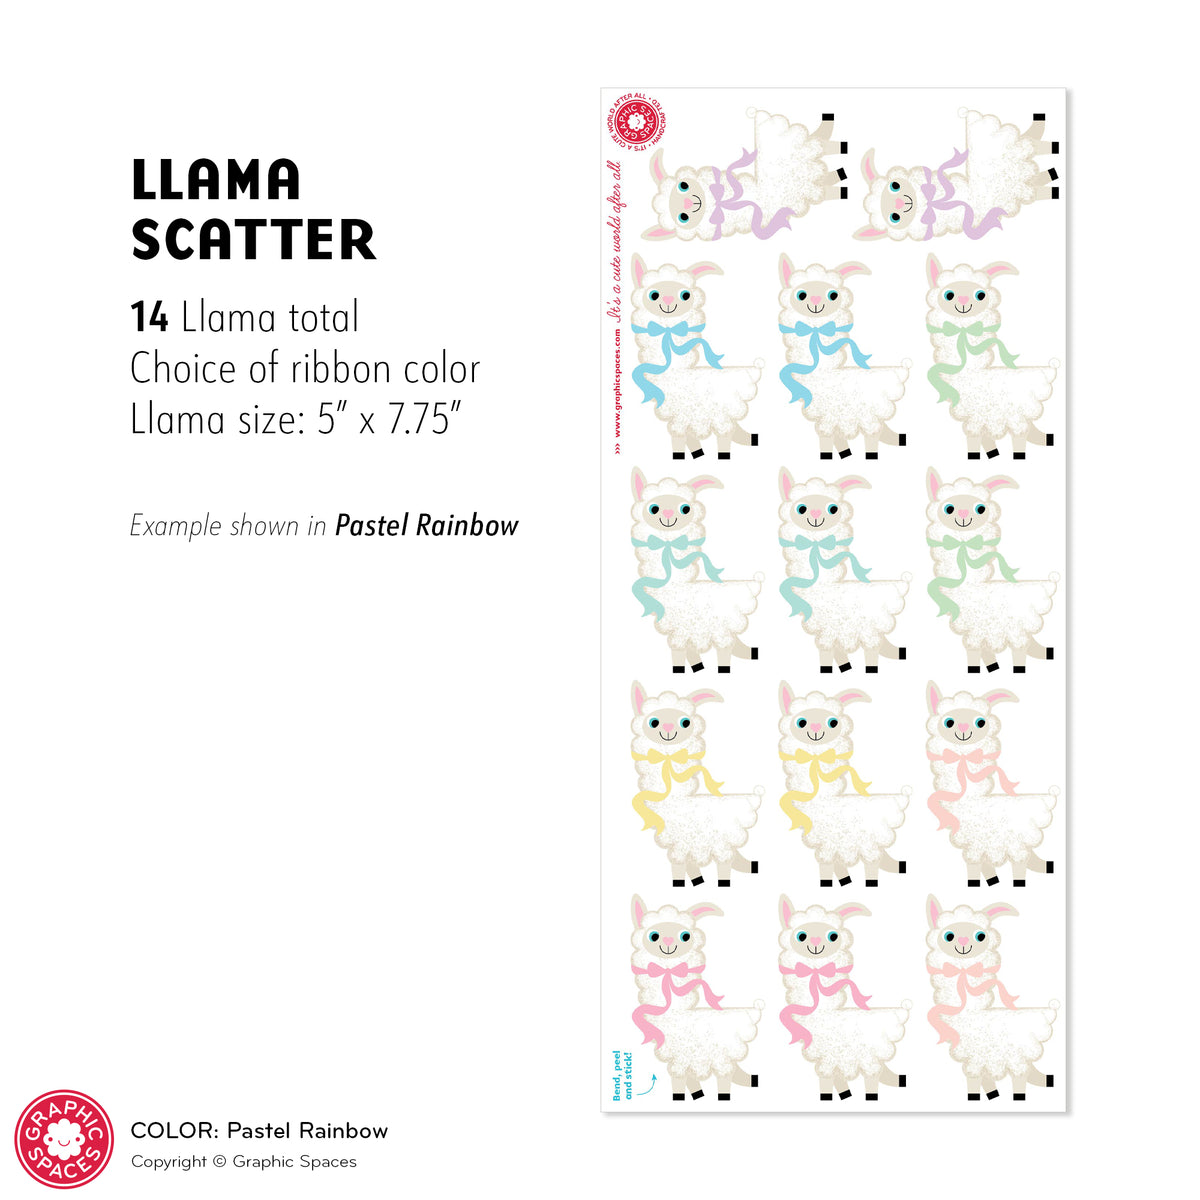 Llama Scatter Fabric Wall Decals - Pack of 14 - Pastel Rainbow